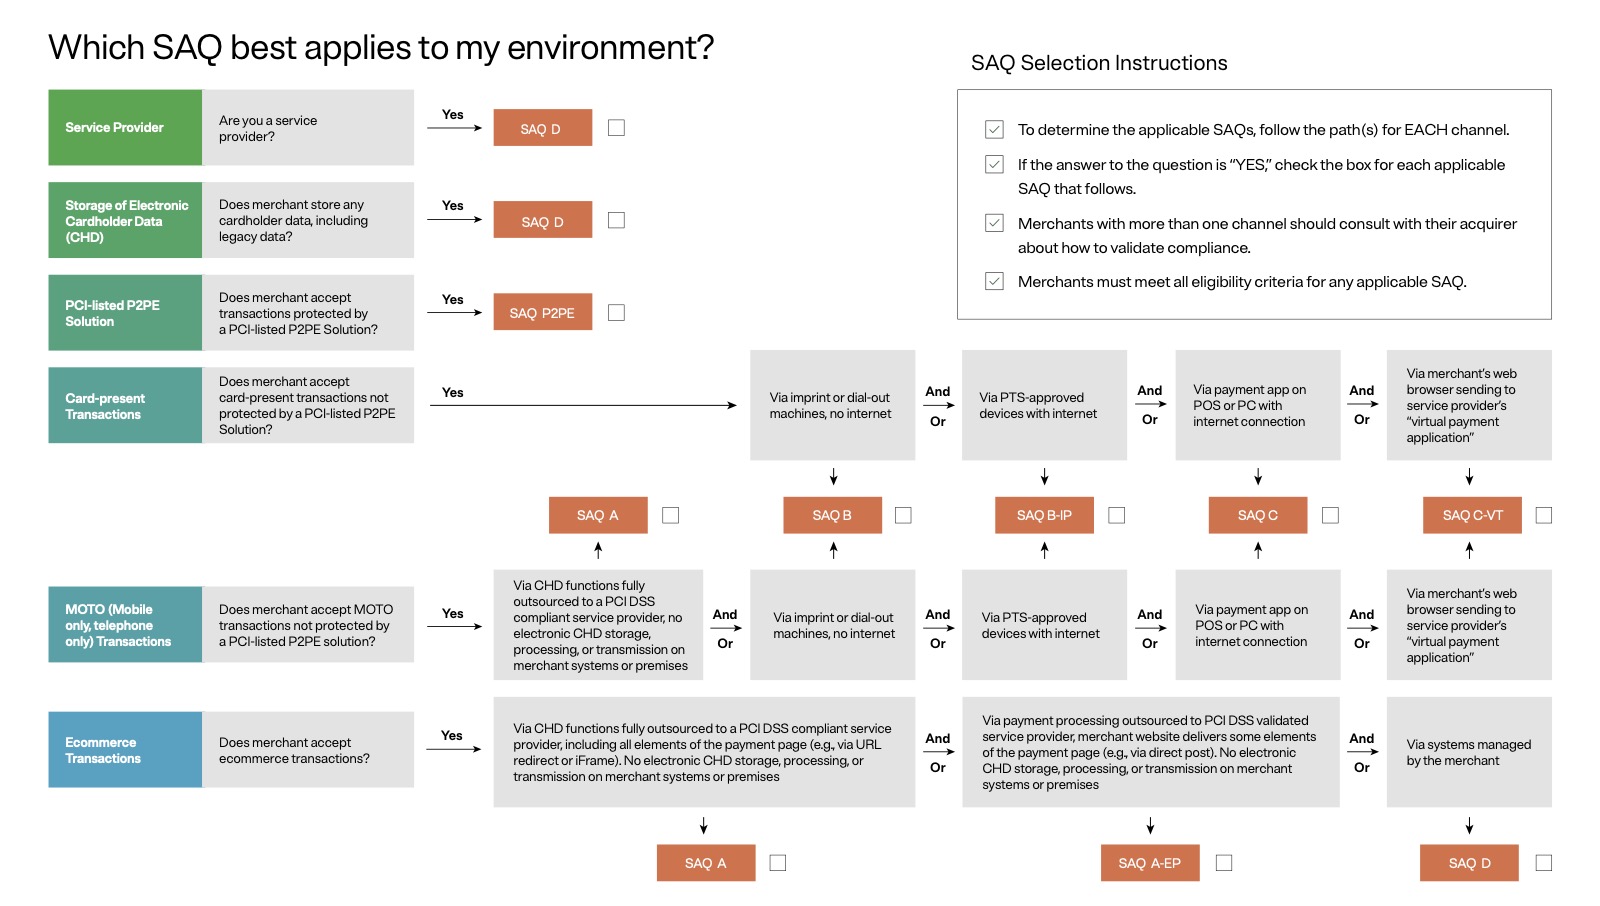 Flow chart depicting which SAQ best apply to environment